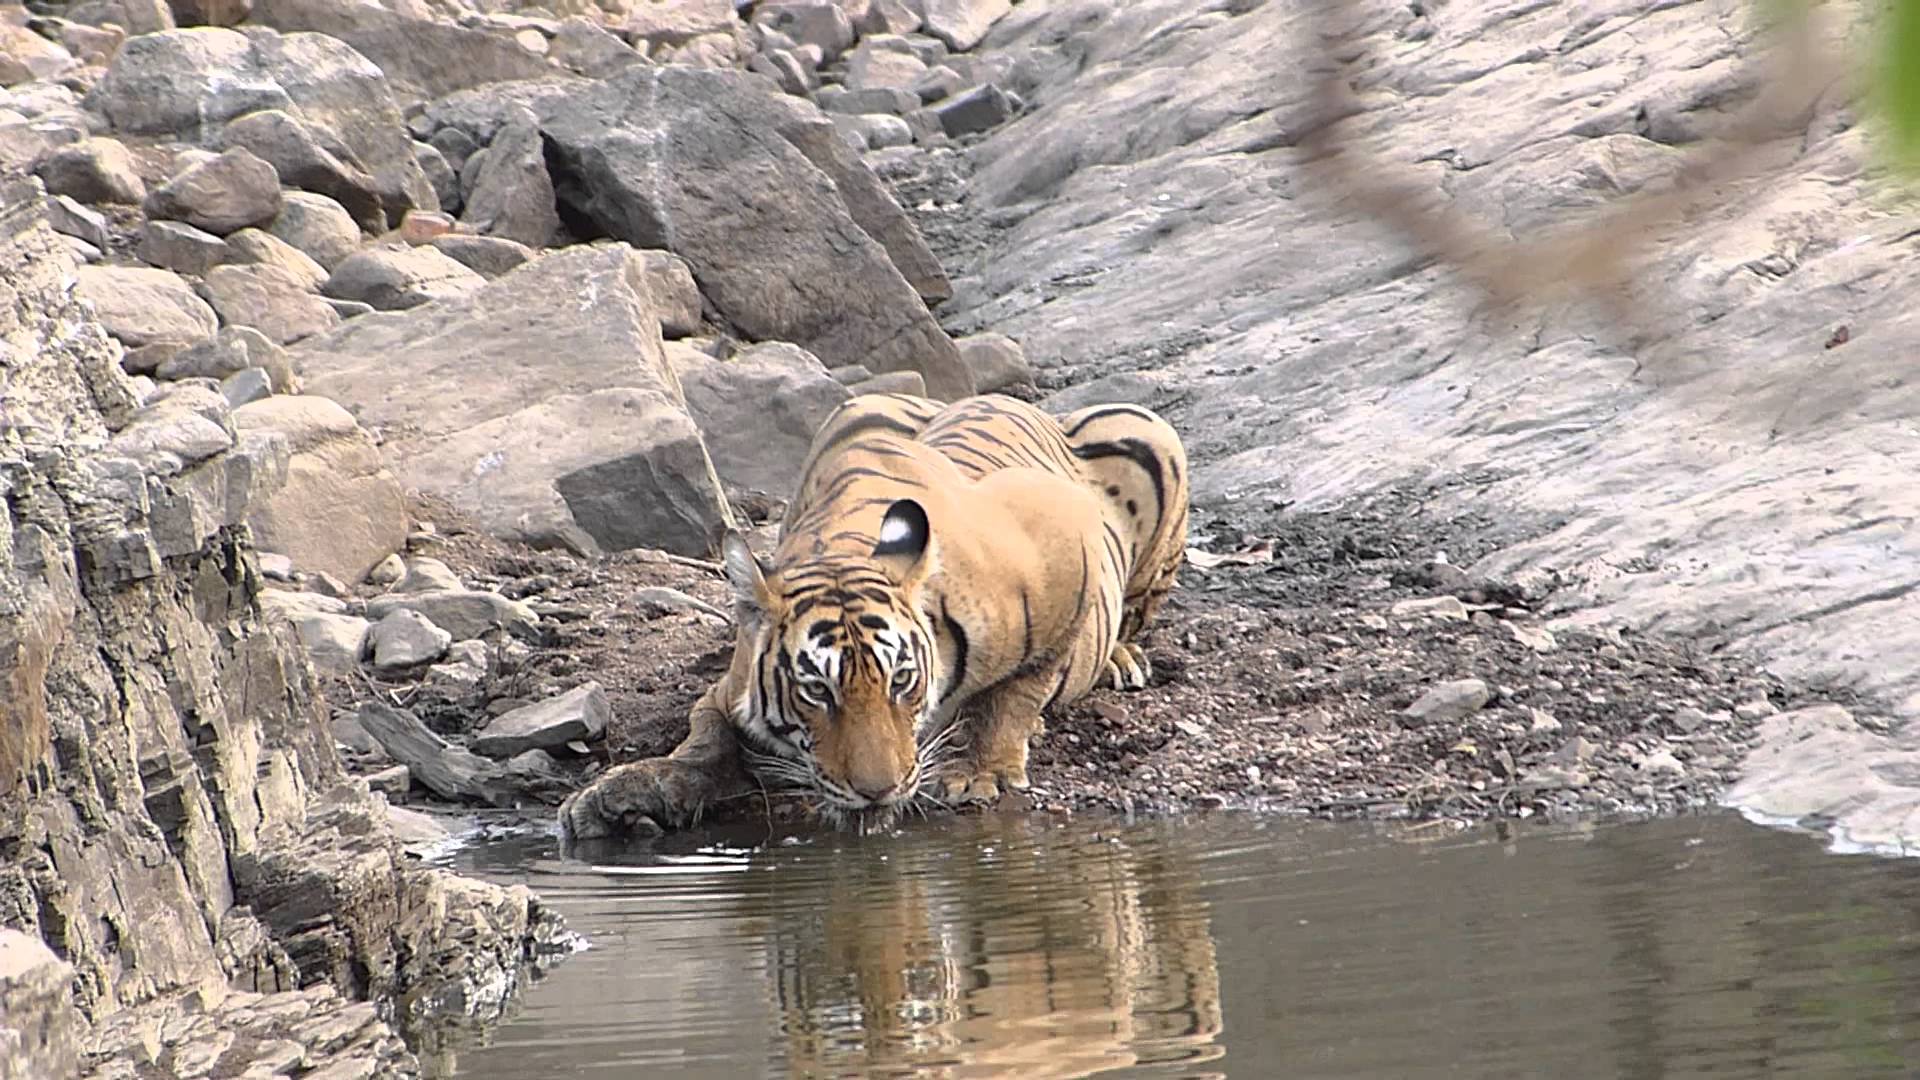 tiger drinking water - YouTube